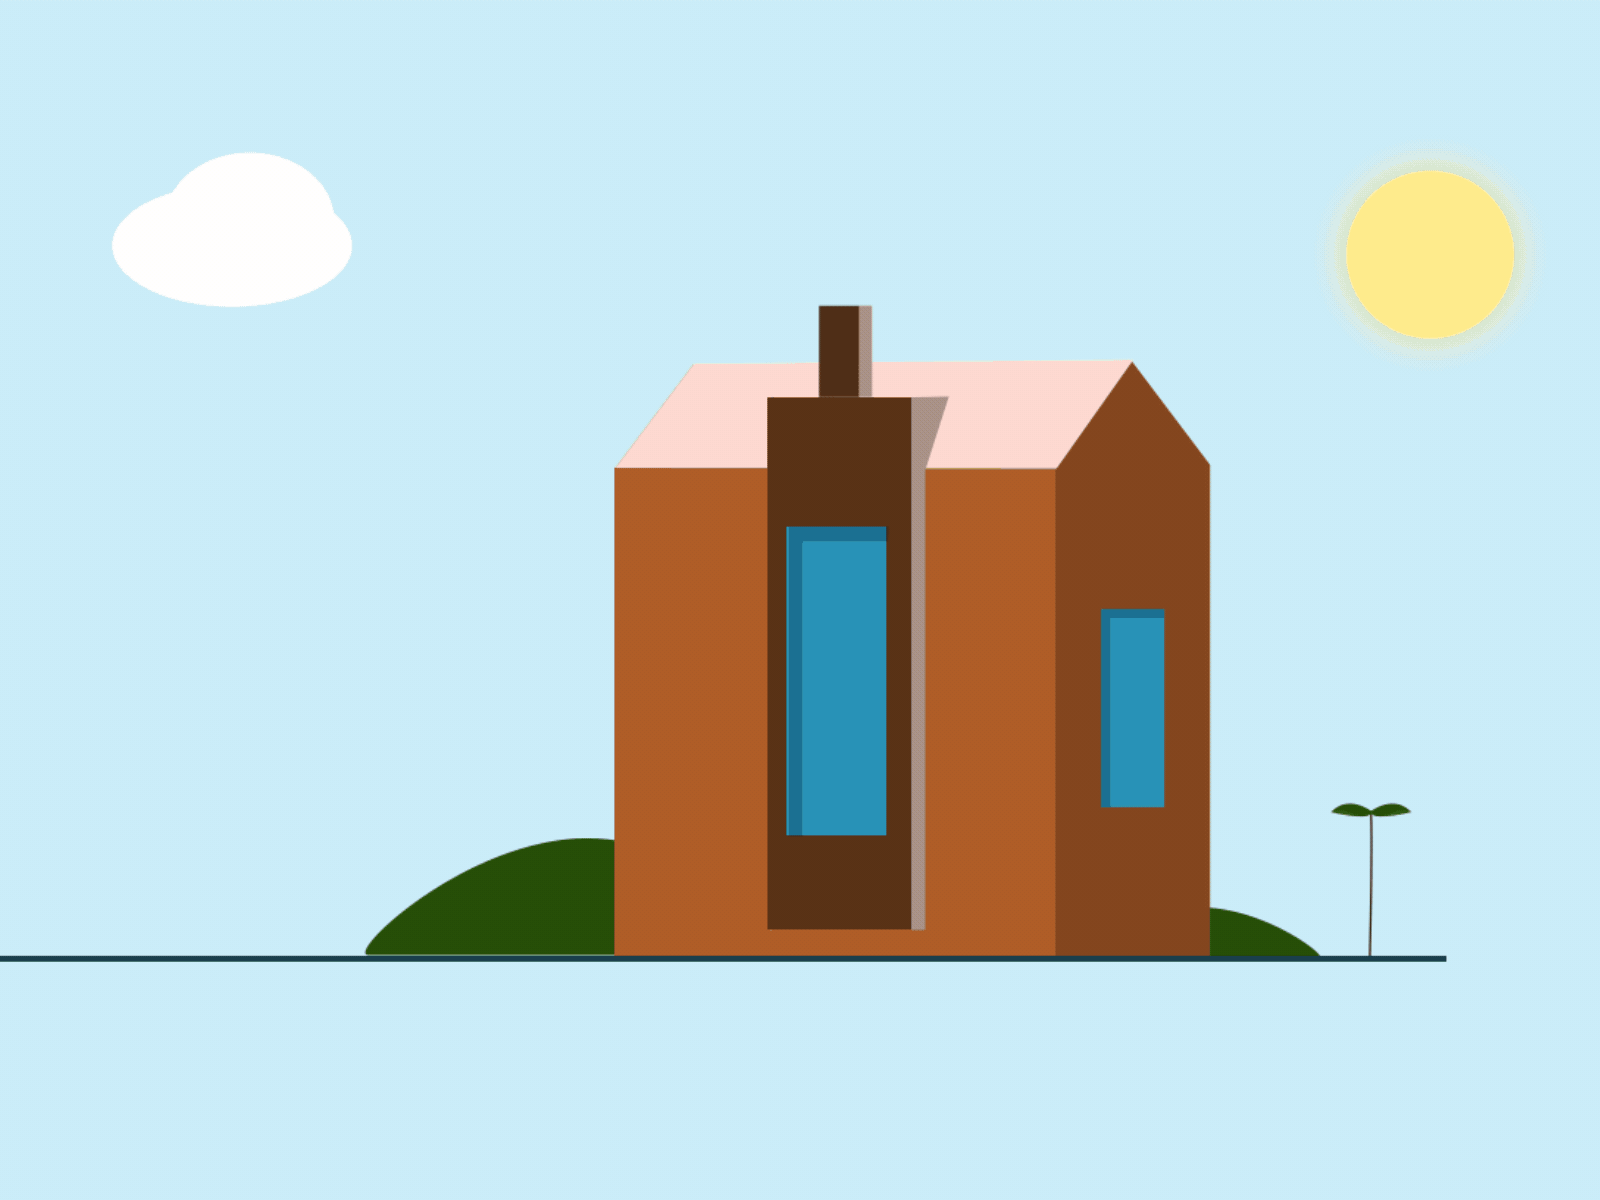 House animation - fake 3D by Ahmed Hassan on Dribbble